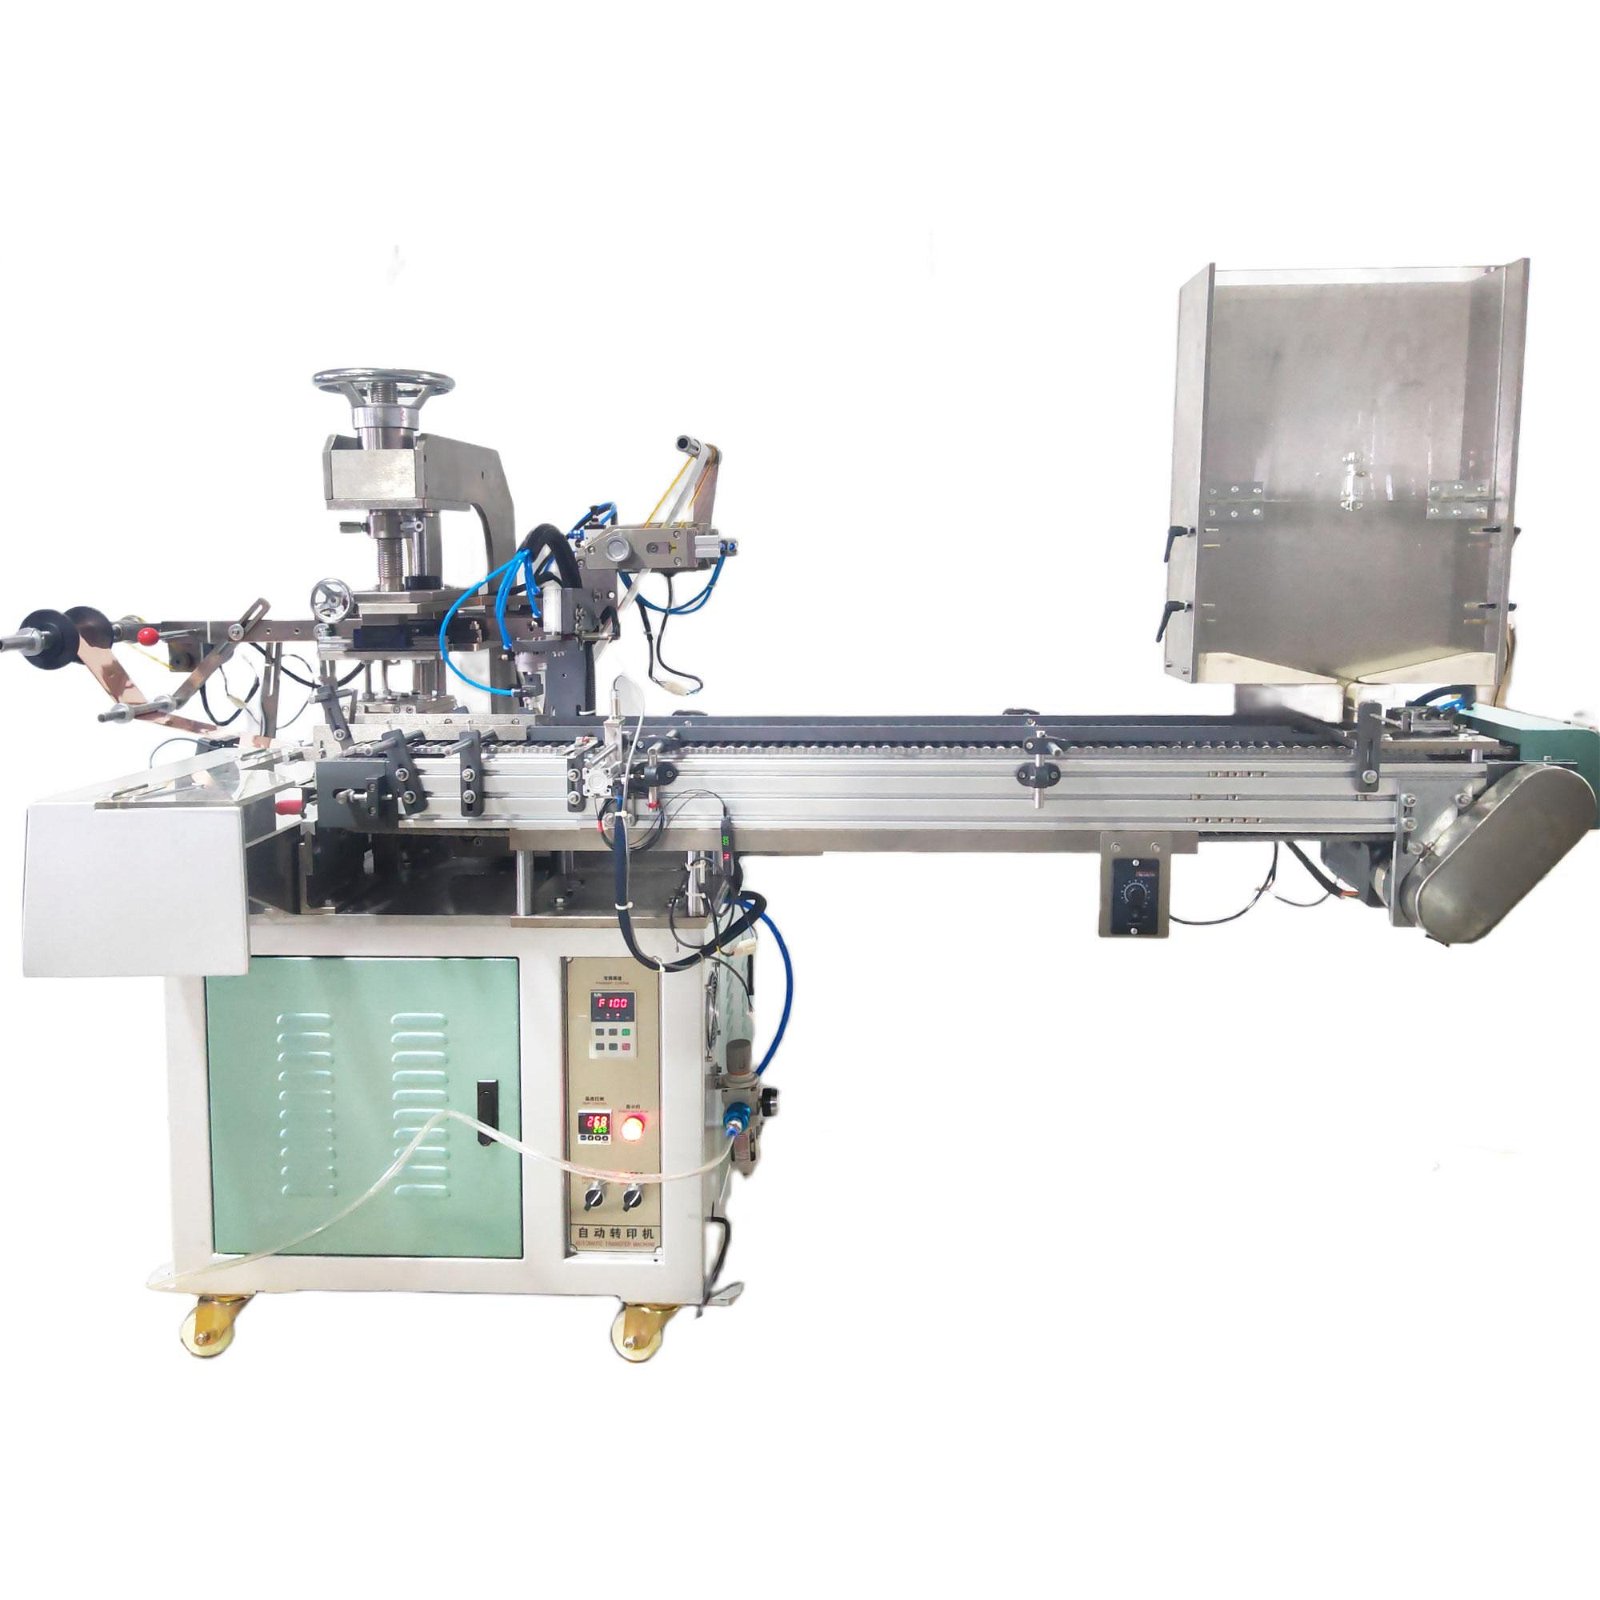 Automatic pen hot stamping machine with alignment device 3